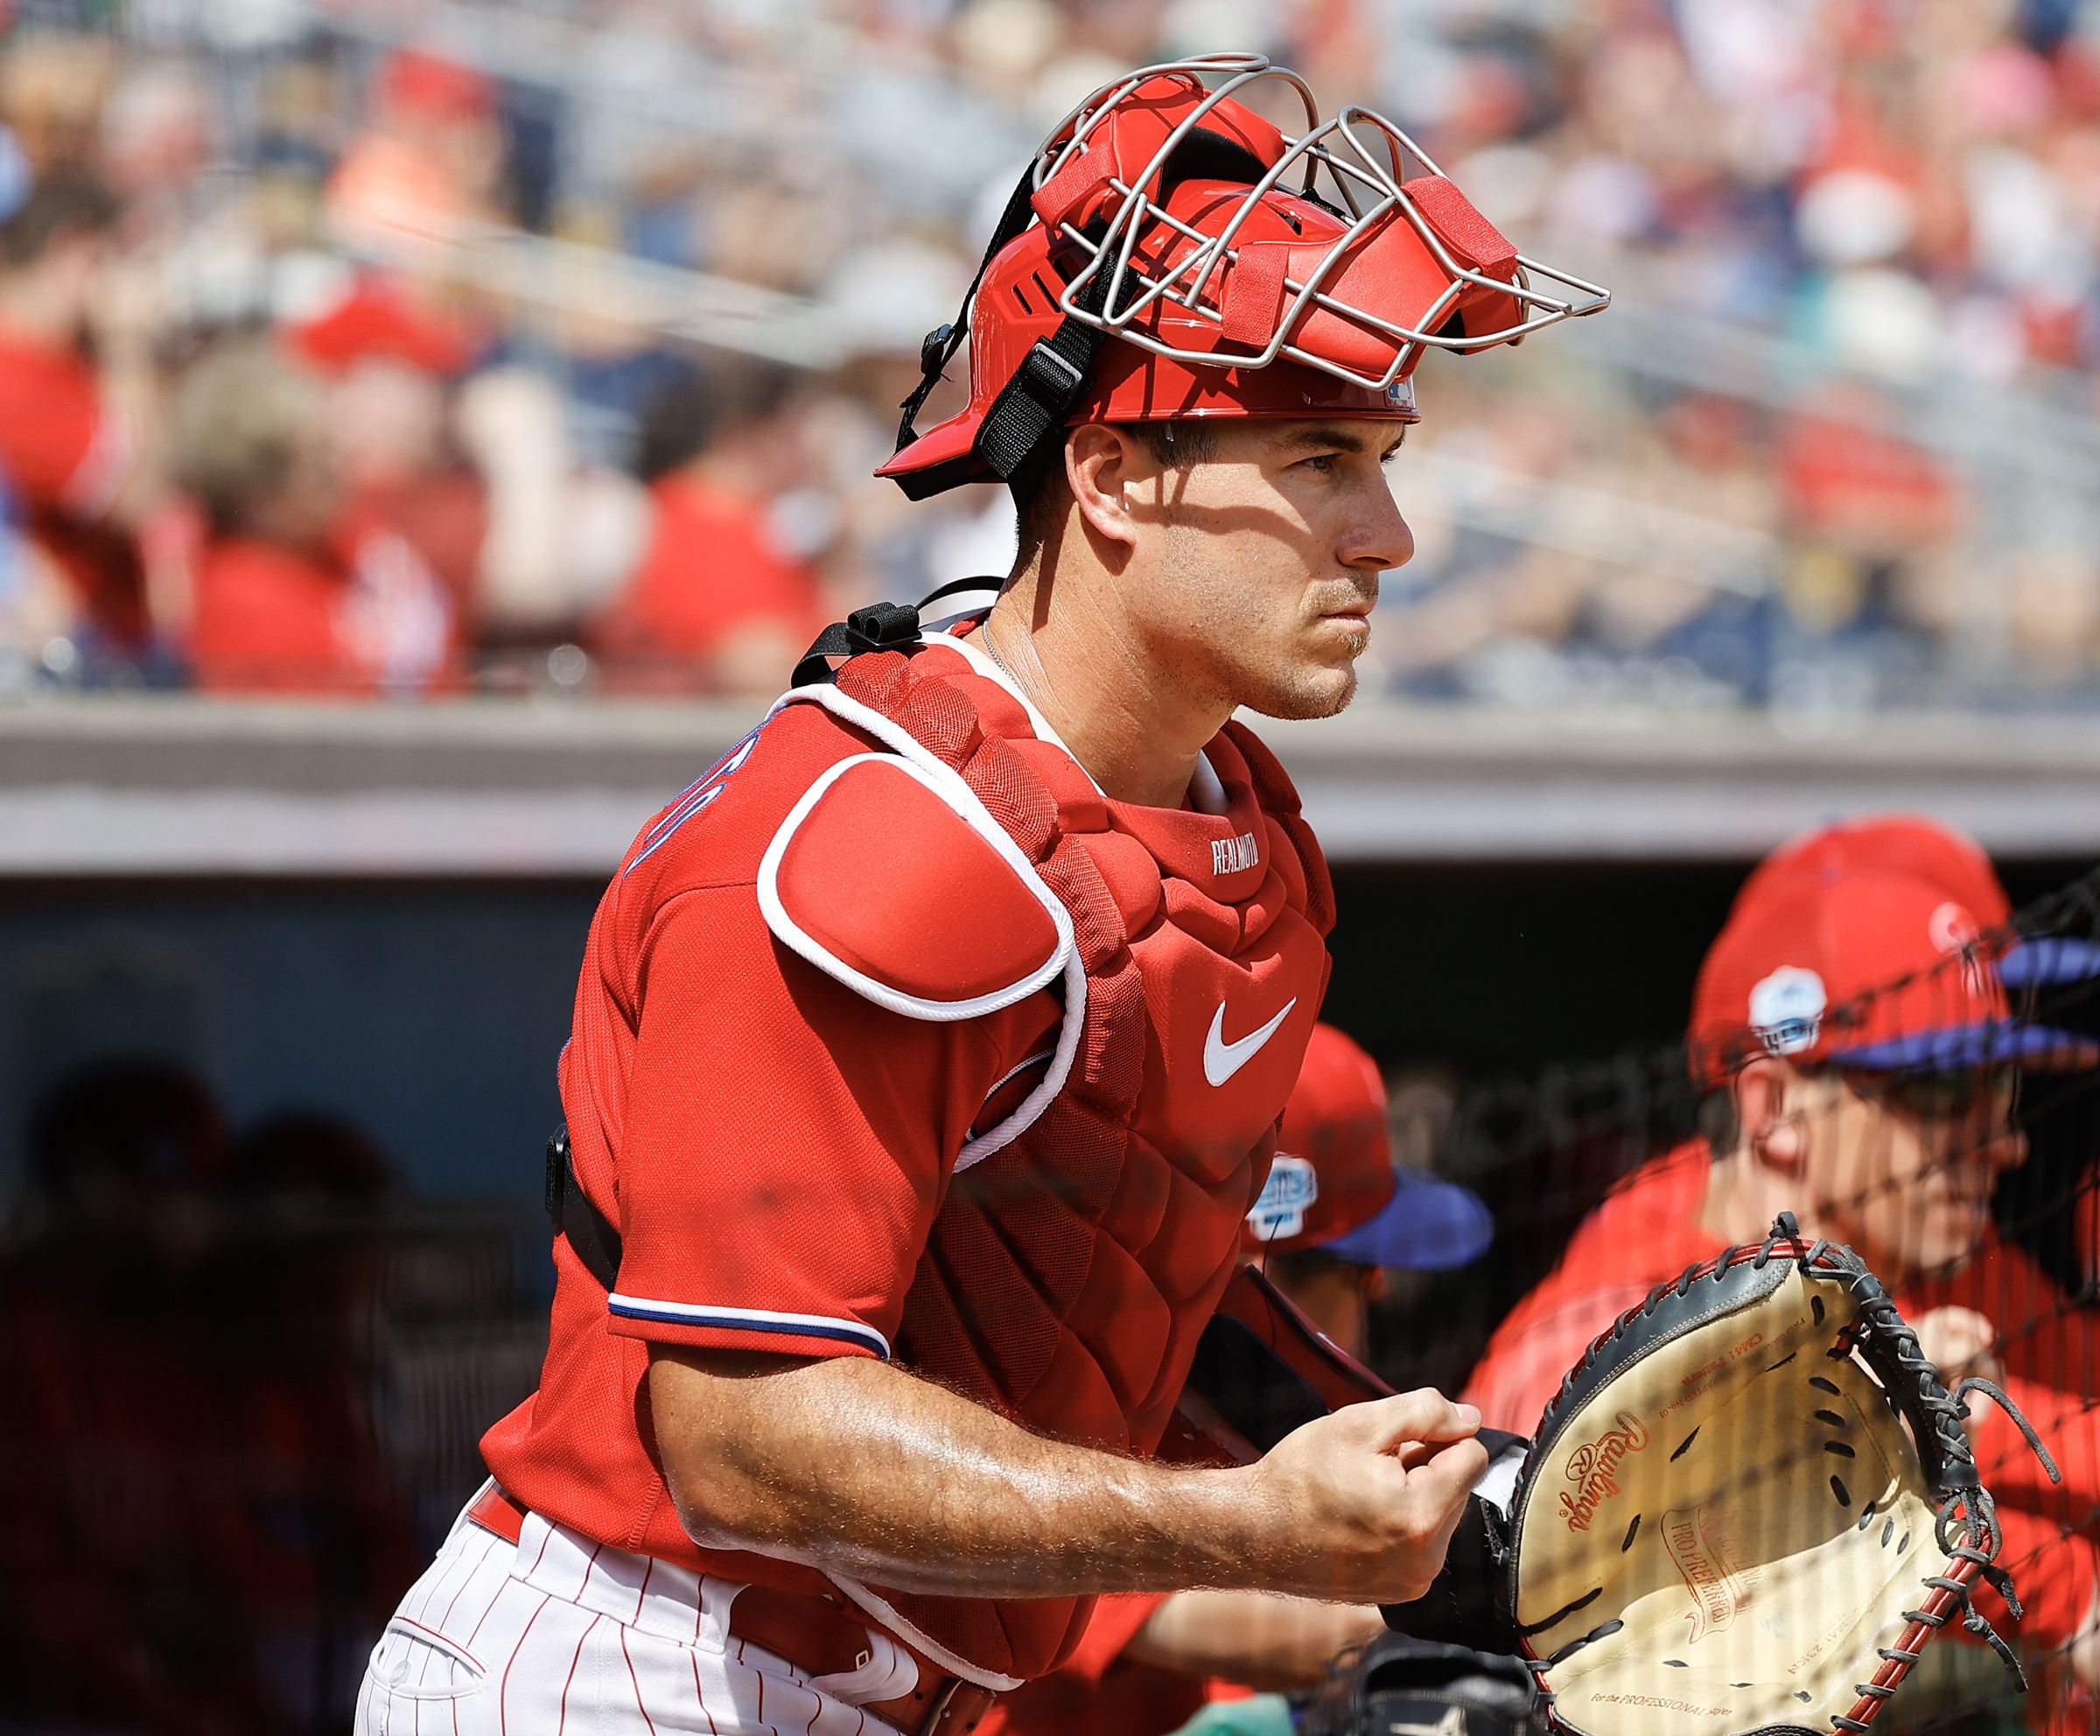 Can Darick Hall Replace Rhys Hoskins in the Phillies Lineup? - New Baseball  Media